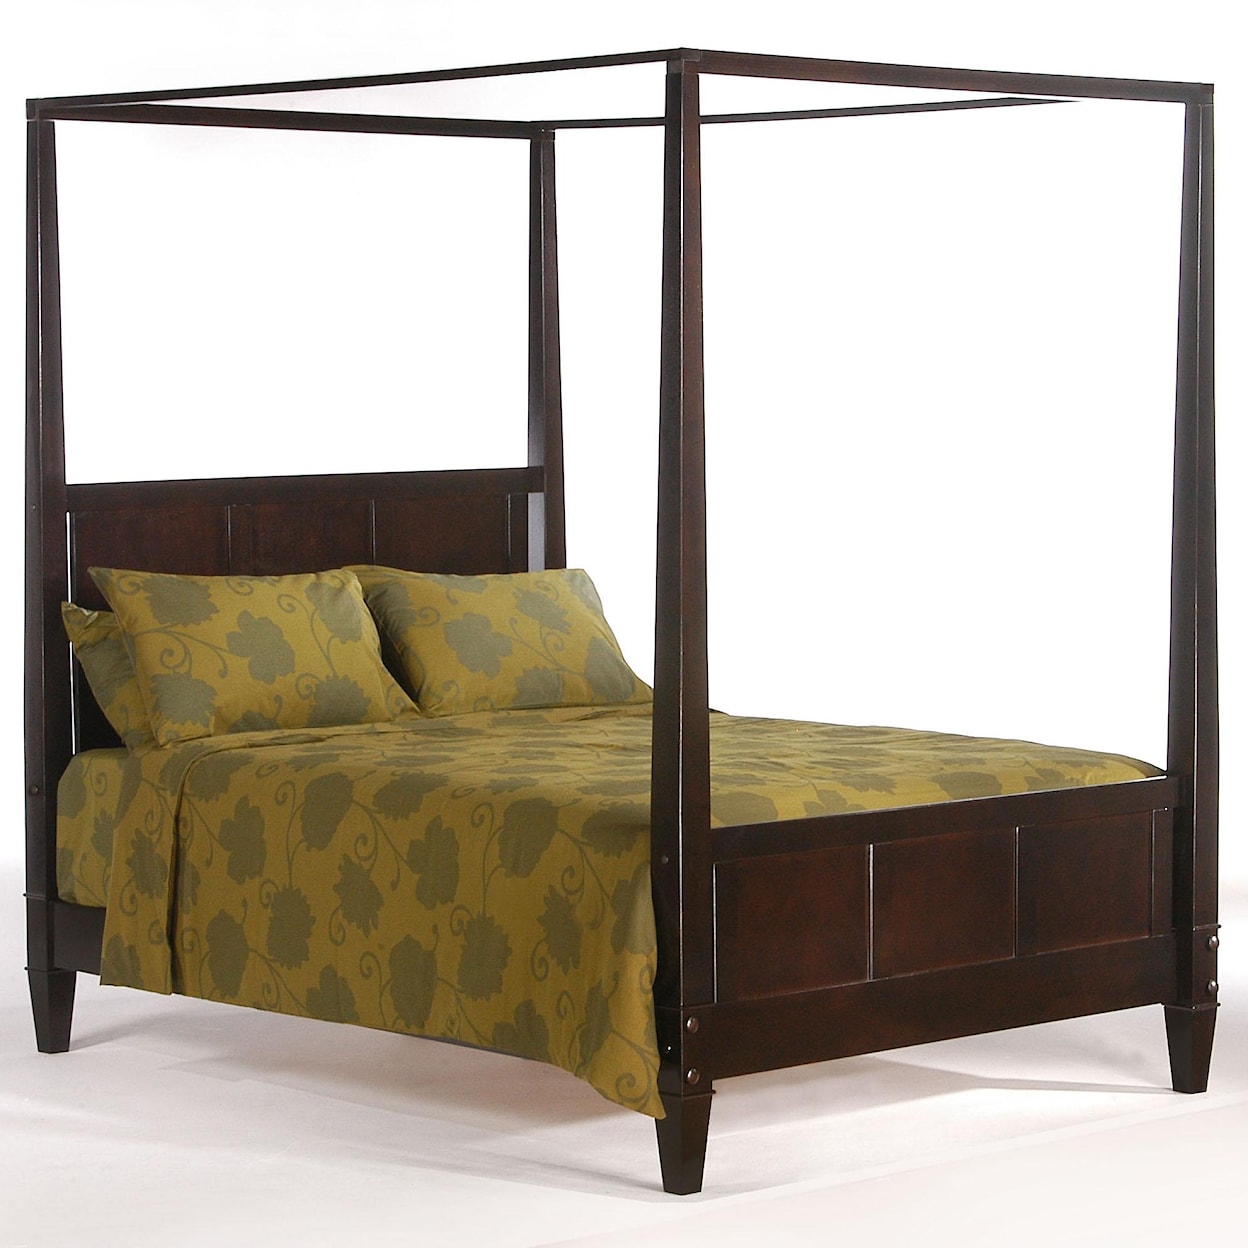 Night & Day Furniture Spice Full Canopy Bed